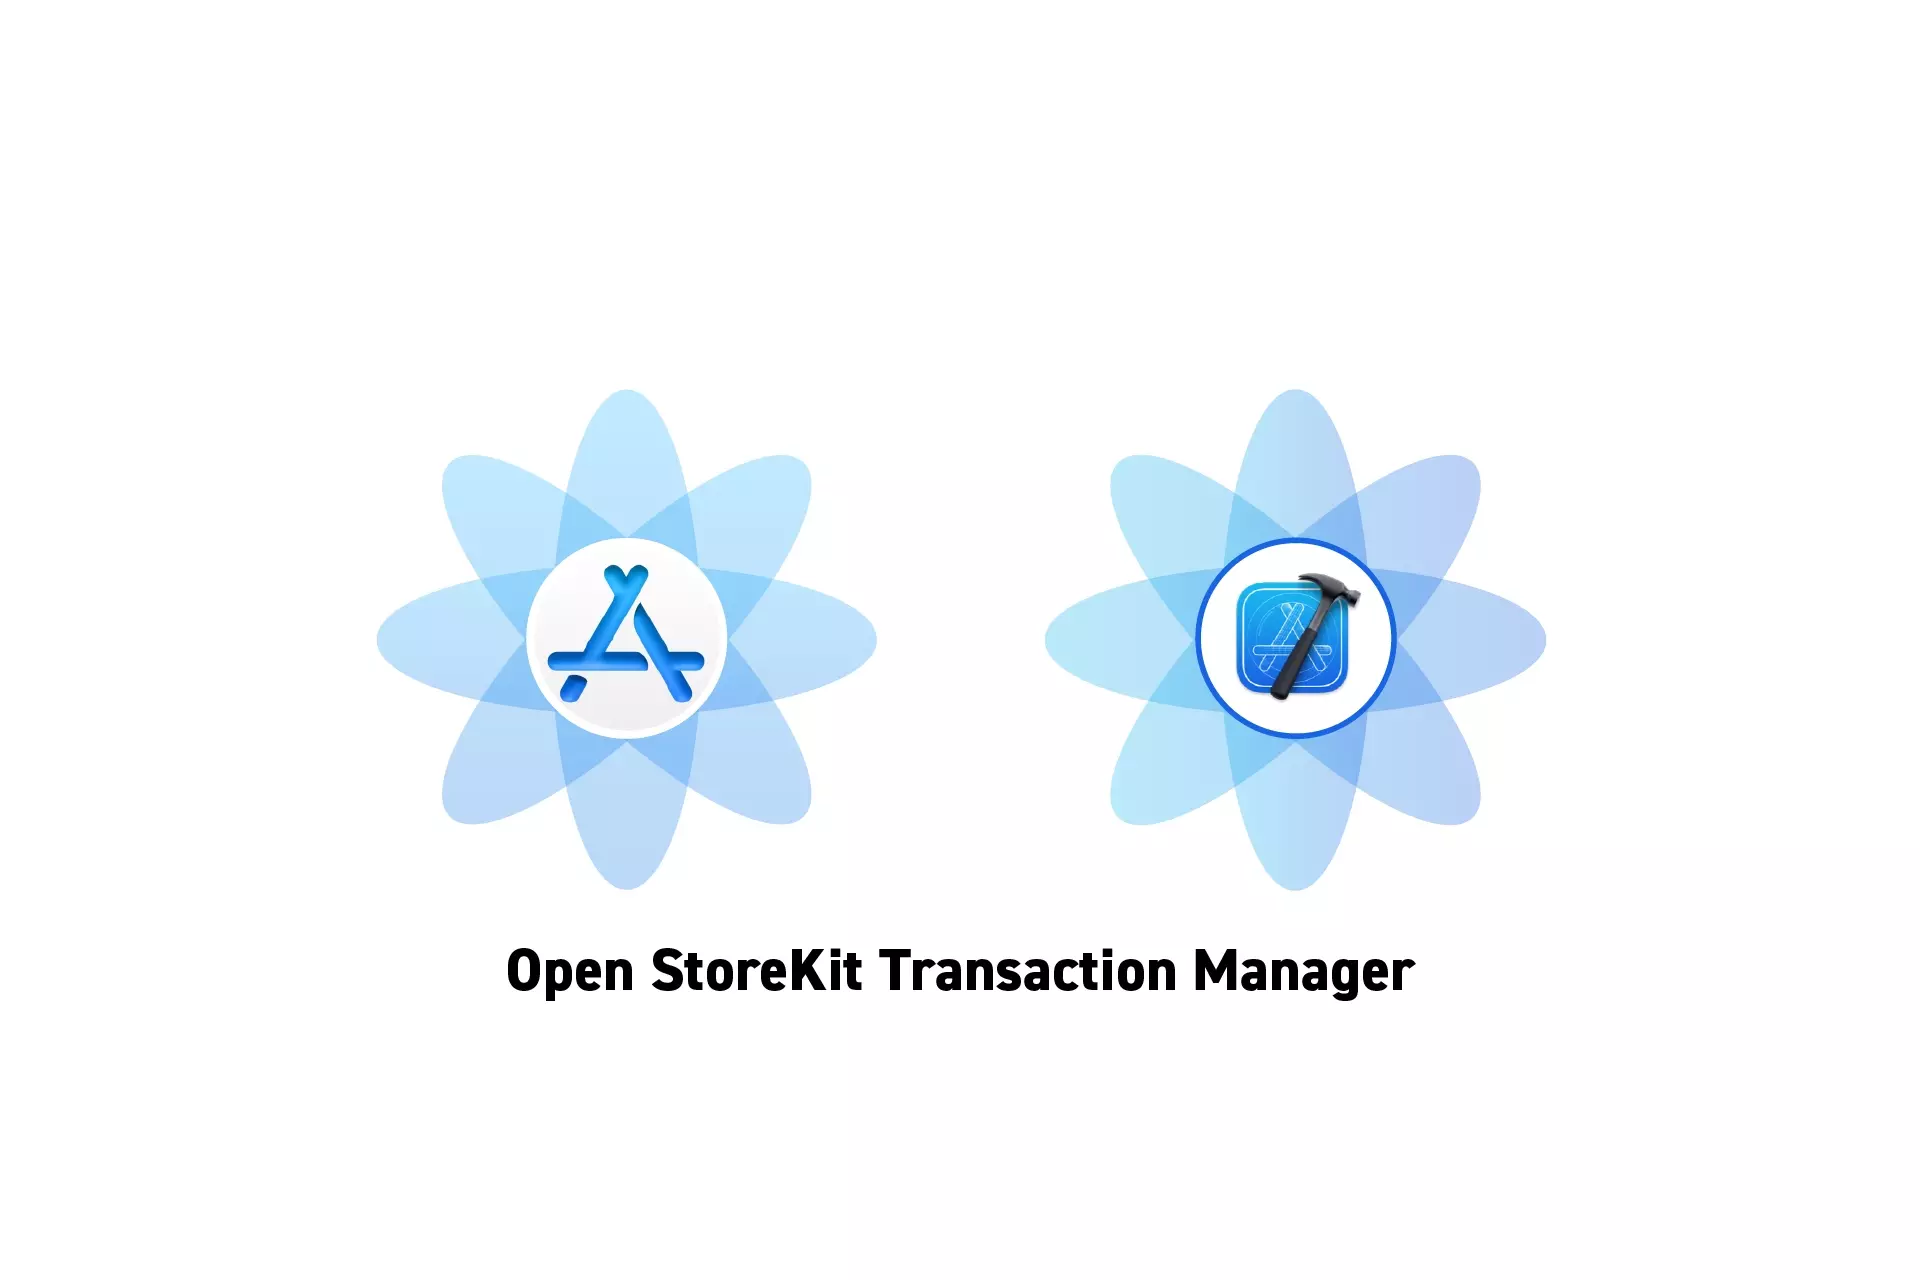 Two flowers that represent StoreKit and Xcode with the text "Open StoreKit Transaction Manager" beneath it.